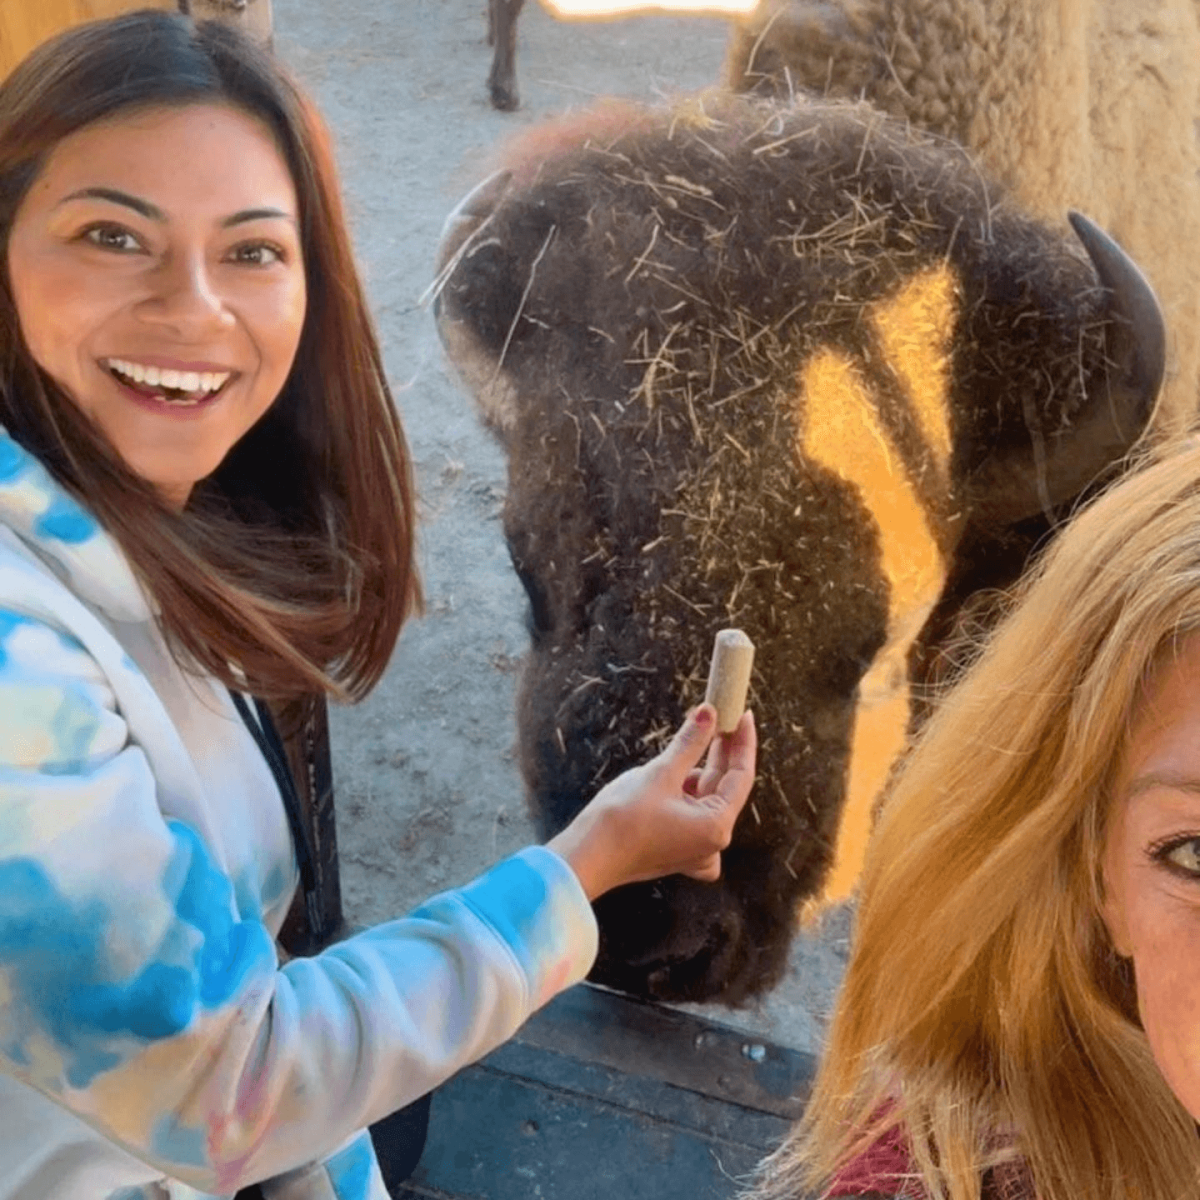 Cheerful tourists feeding a bison at Terry Bison Ranch, known as one of the best selfie spots.